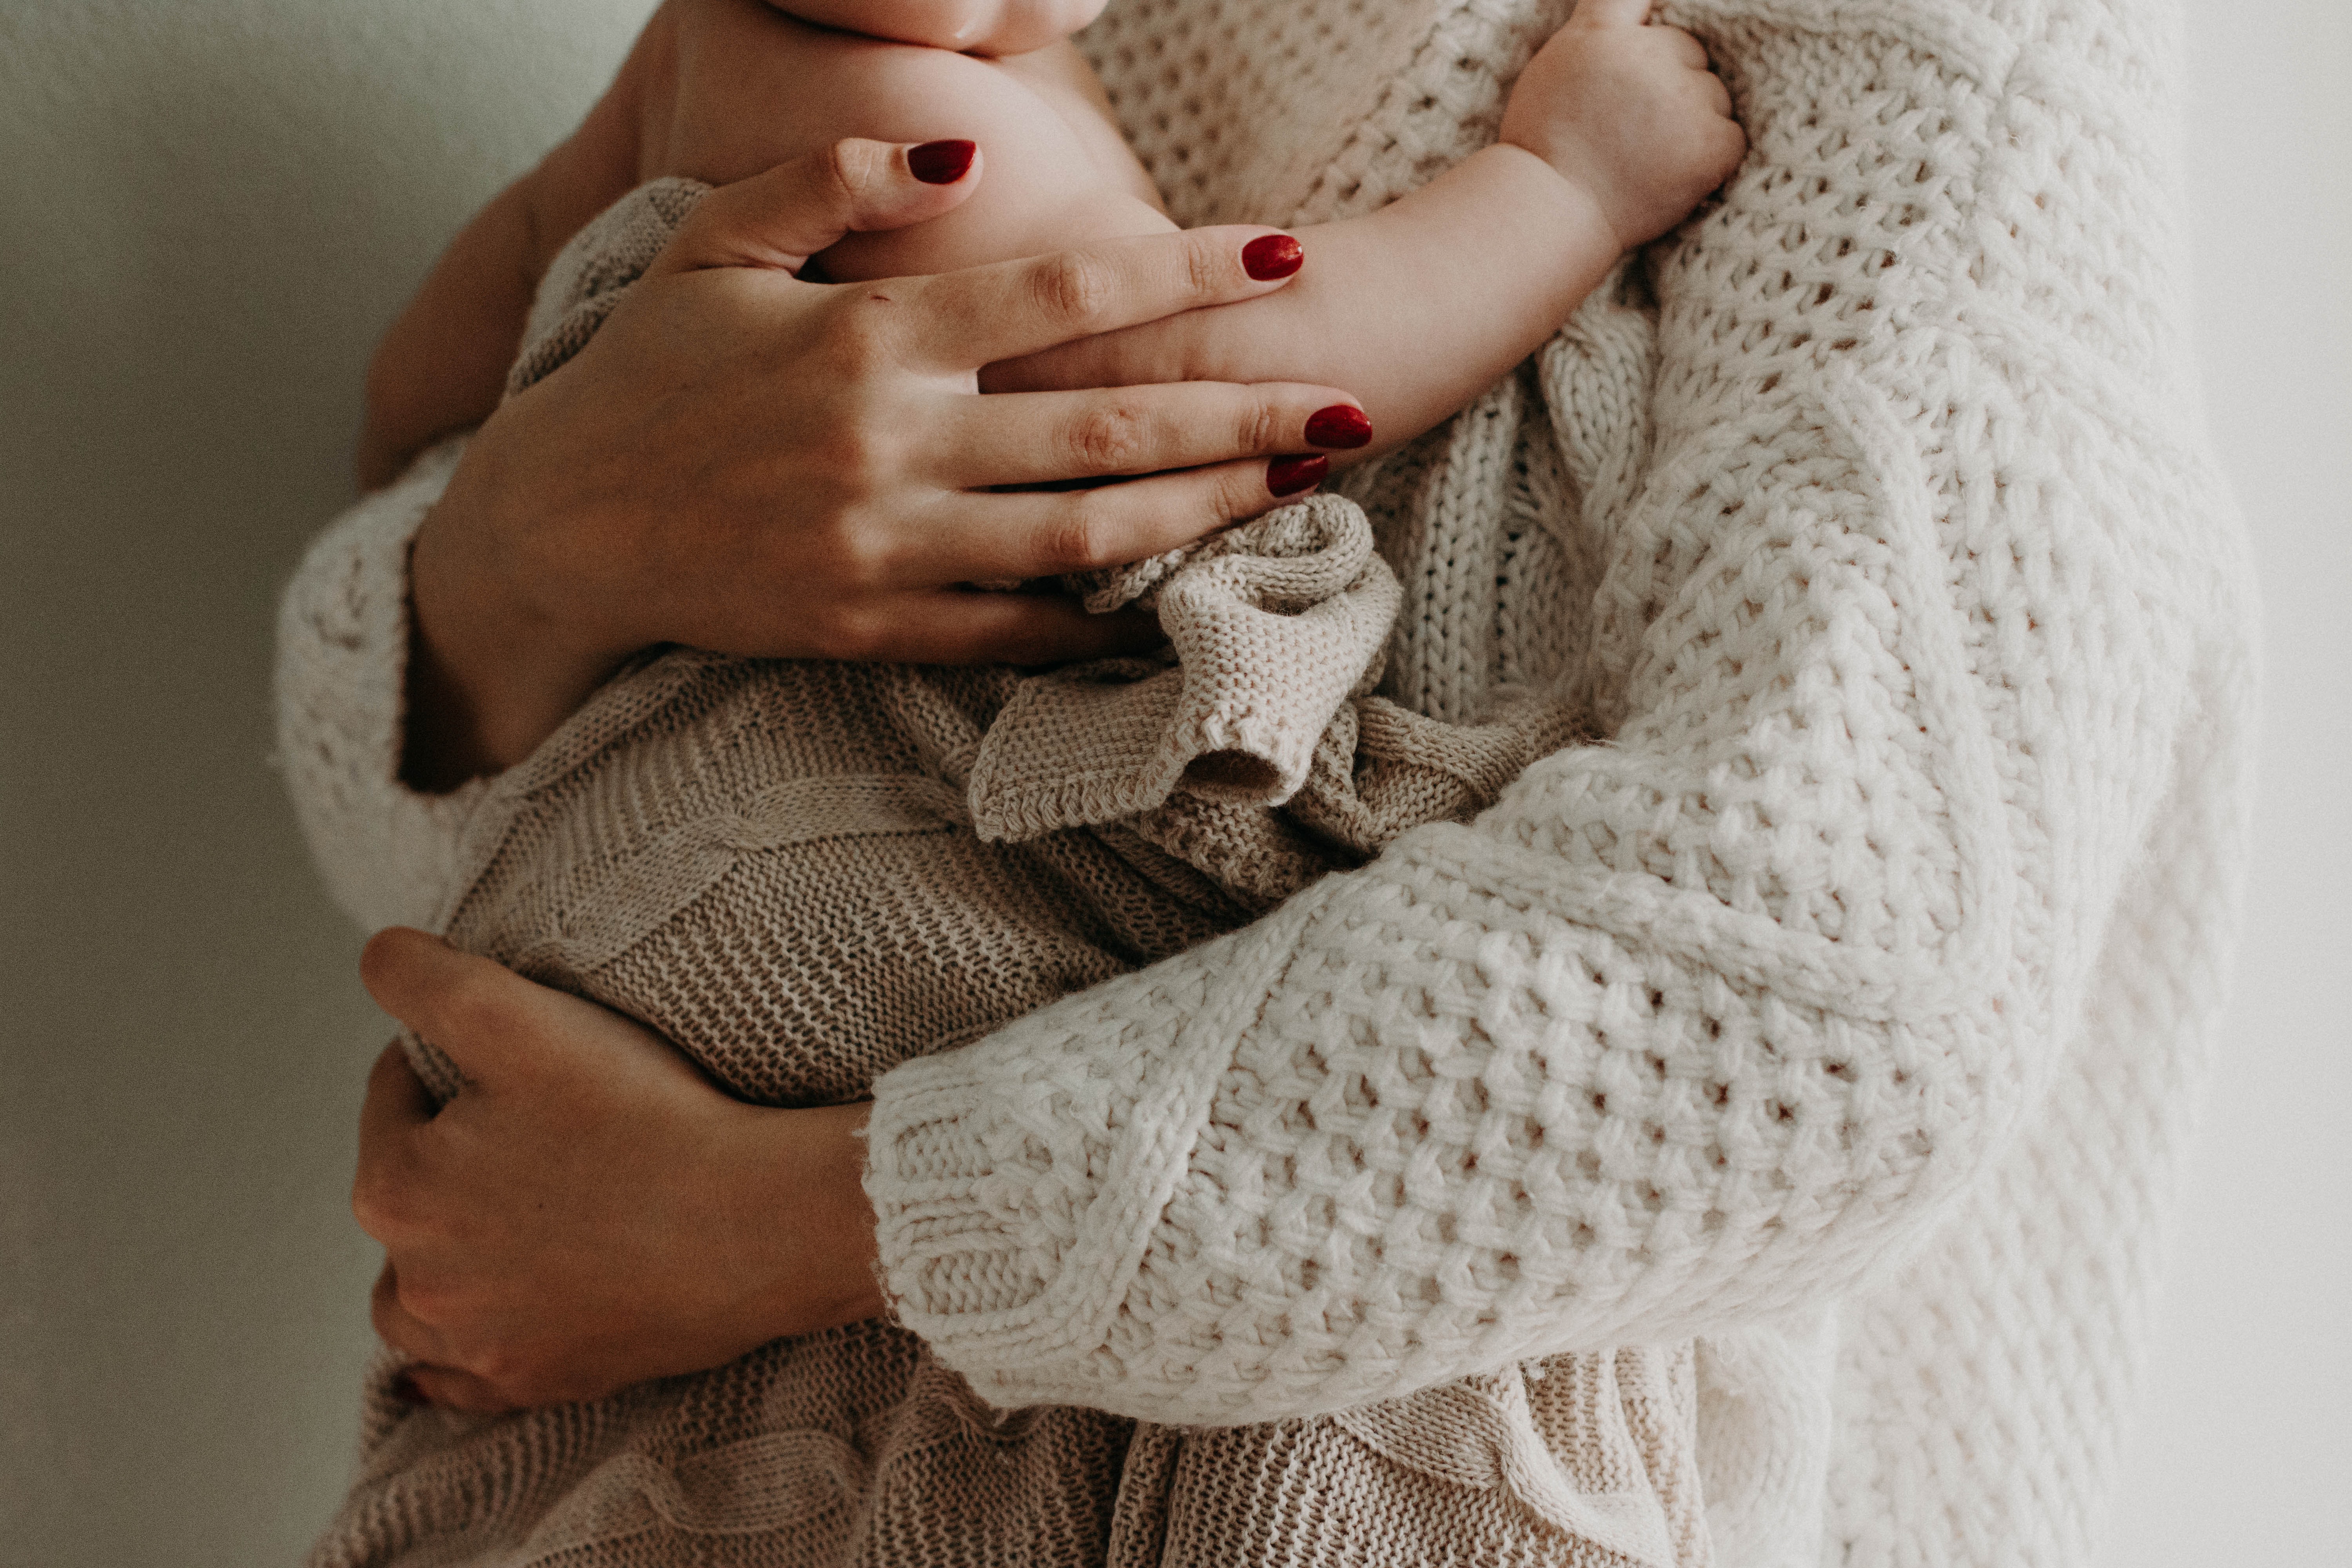 Woman holding baby | Source: Pexels